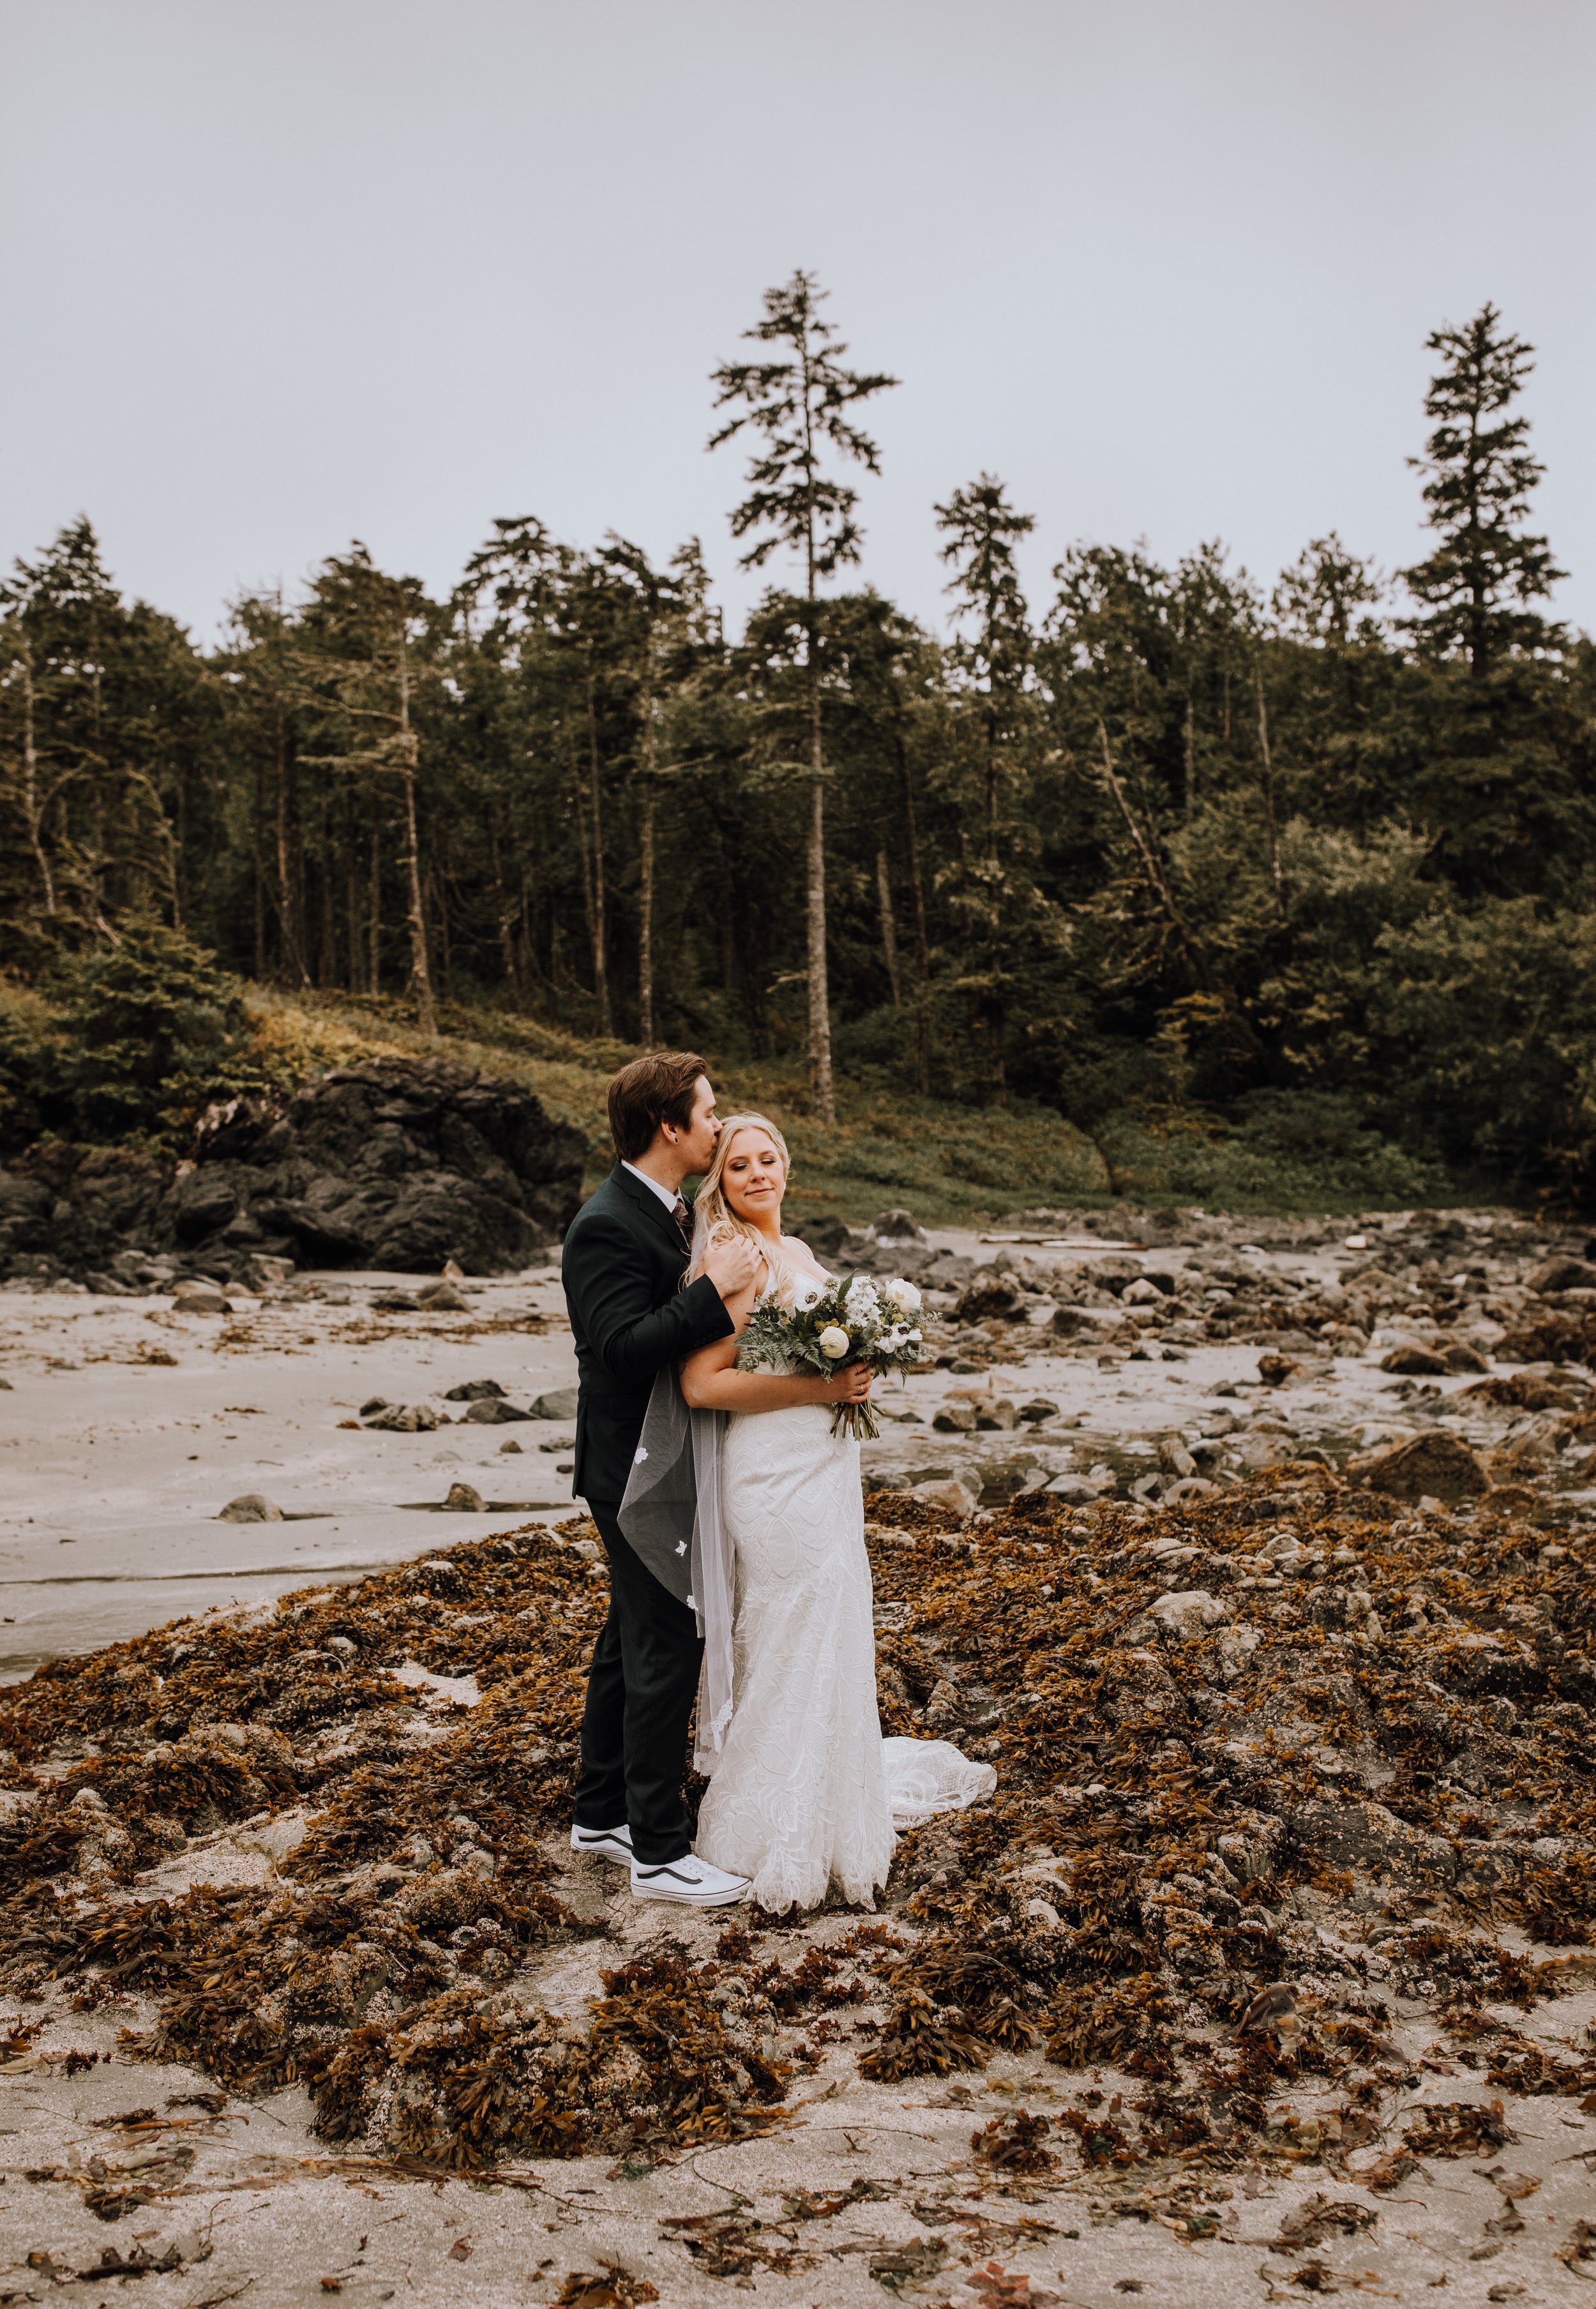 Brooke and Devin Wedding - Tin Wis Best Western Tofino Vancouver Island British Columbia - Elyse Anna Photography-4052.jpg